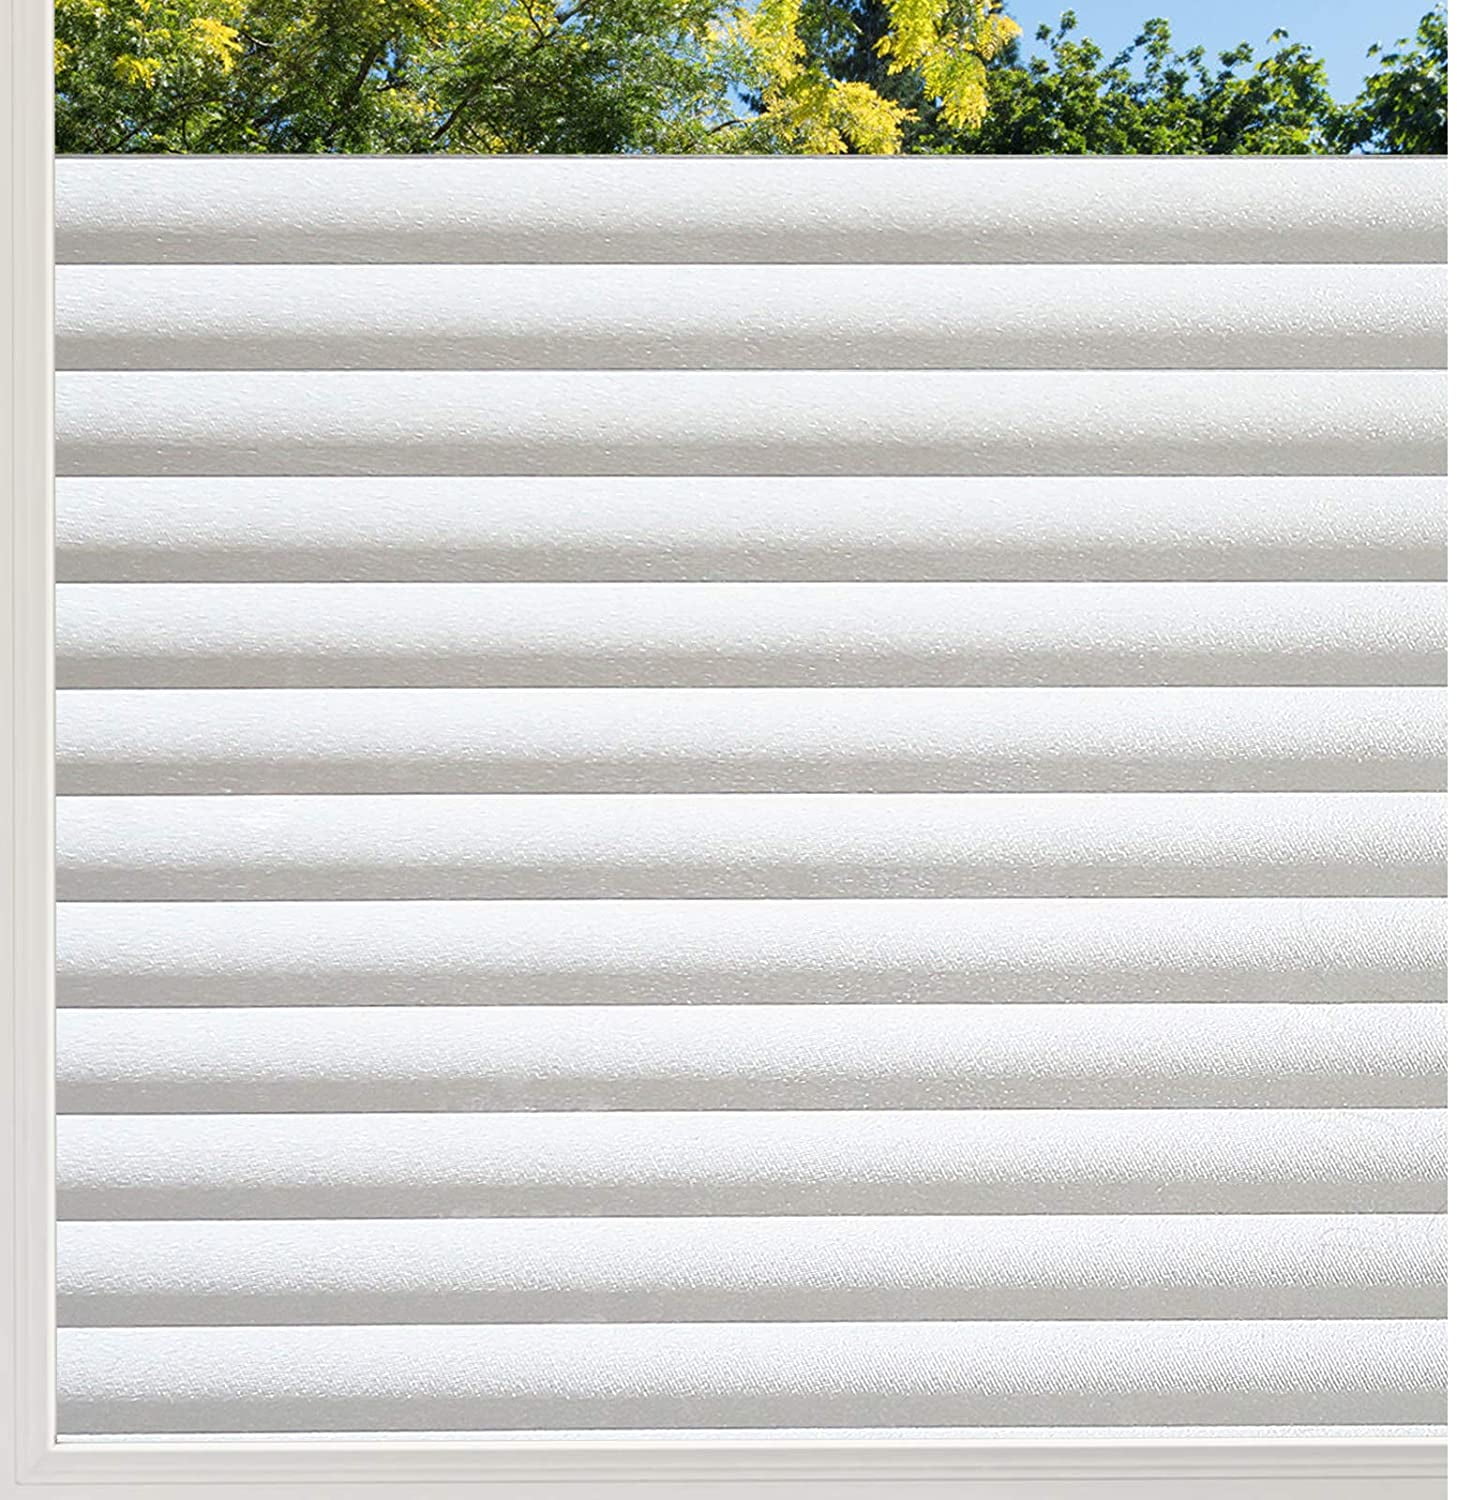 White Frost Privacy window film Made in usa   20 inch x 6 ft intersolar usa 